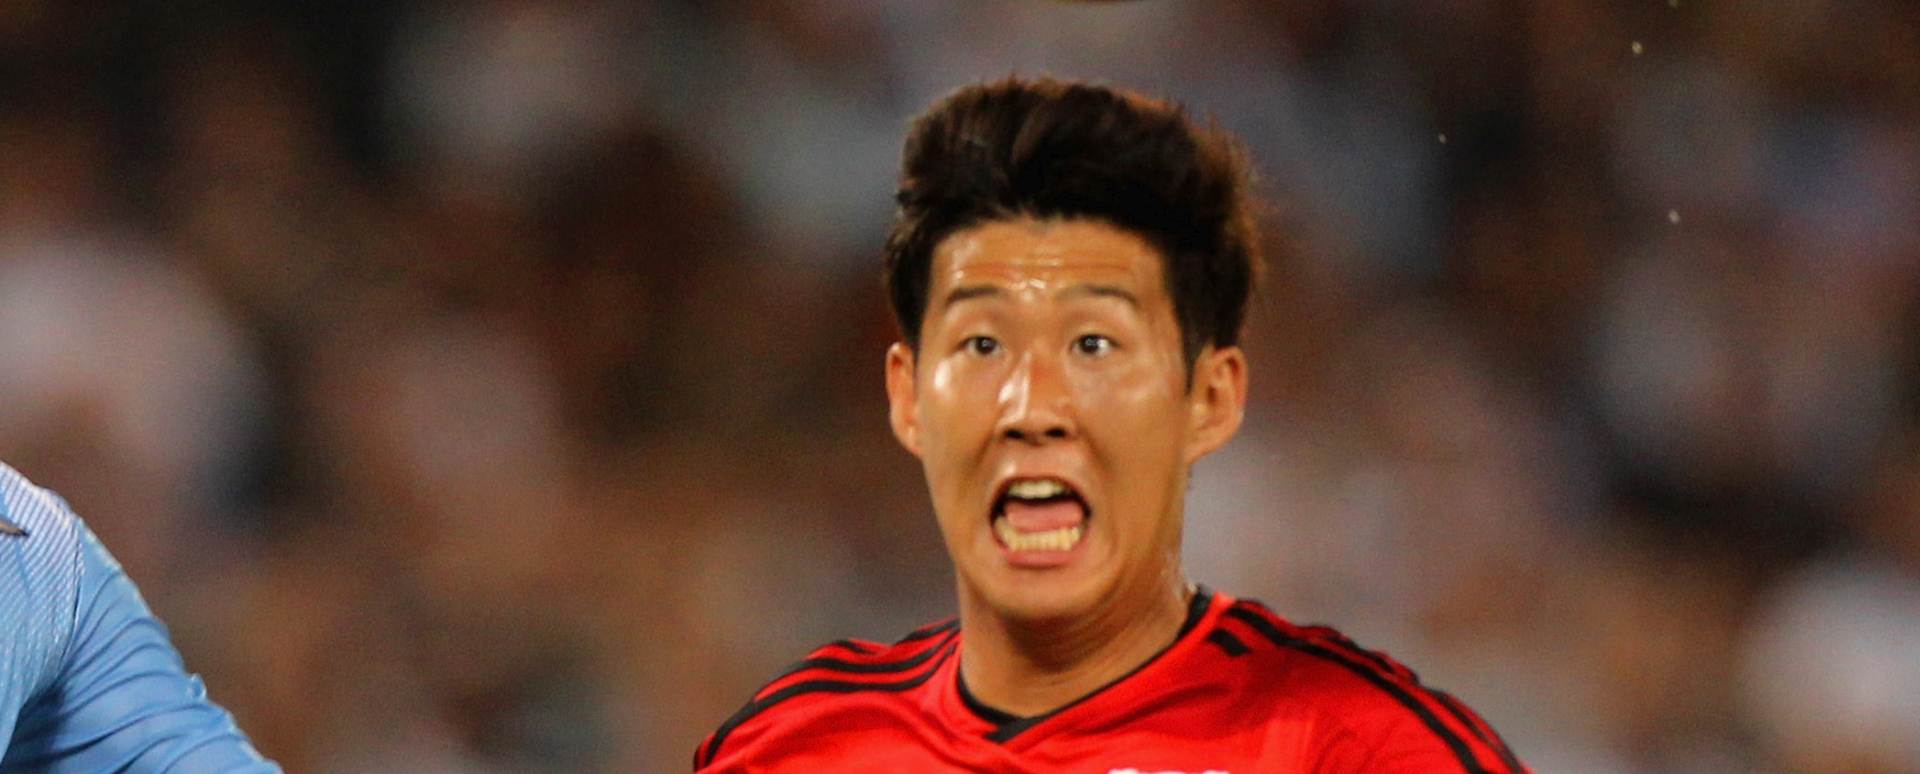 ROME, ITALY - AUGUST 18:  Son Heung-Min (R) of Bayer Leverkusen competes for the ball with Mauricio of SS Lazio during the UEFA Champions League qualifying round play off first leg match between SS Lazio and Bayer Leverkusen at Olimpico Stadium on August 18, 2015 in Rome, Italy.  (Photo by Paolo Bruno/Getty Images)